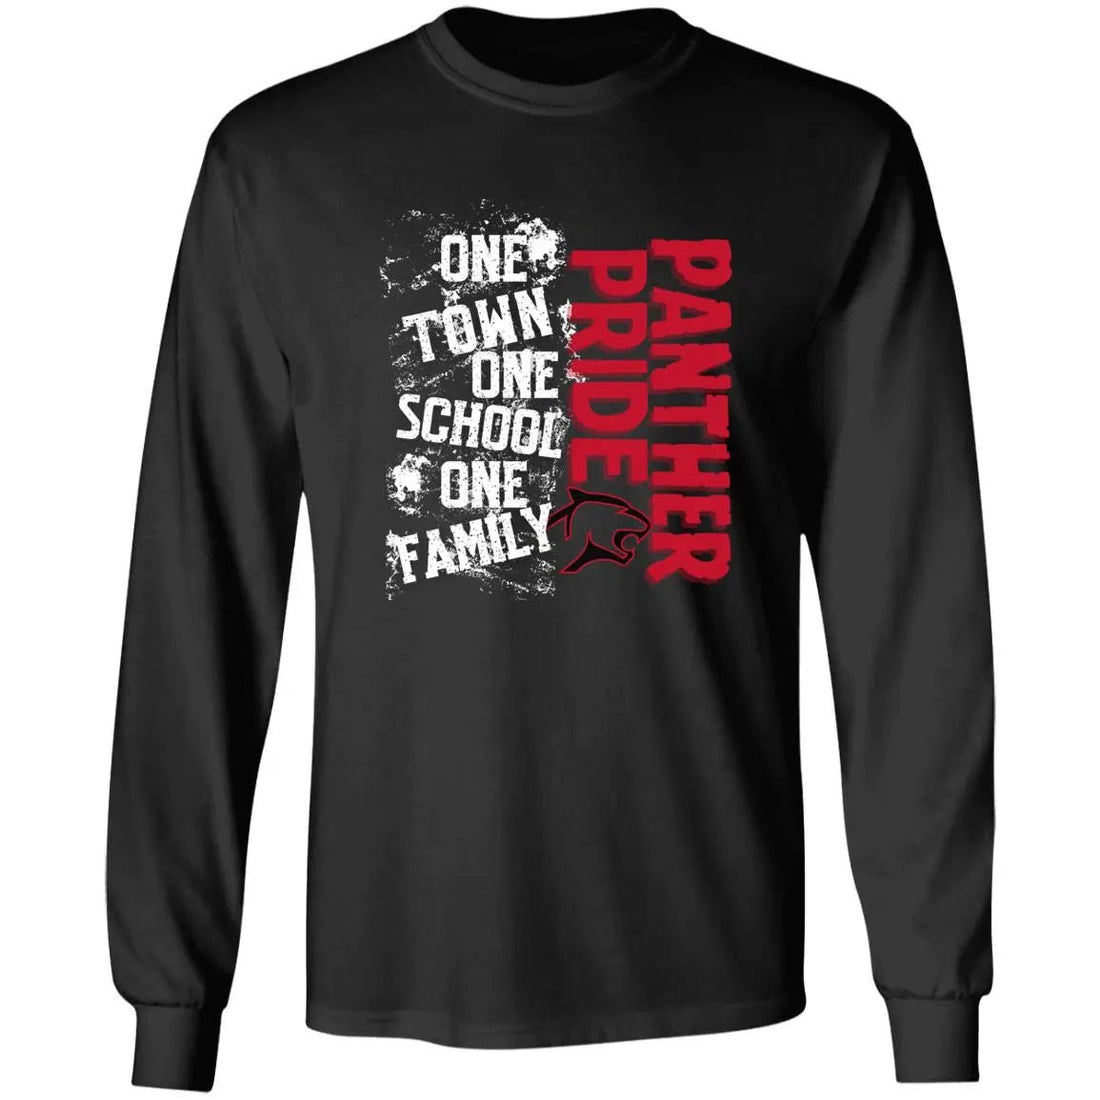 Panther Pride Long Sleeve Ultra Cotton T-Shirt - T-Shirts - Positively Sassy - Panther Pride Long Sleeve Ultra Cotton T-Shirt